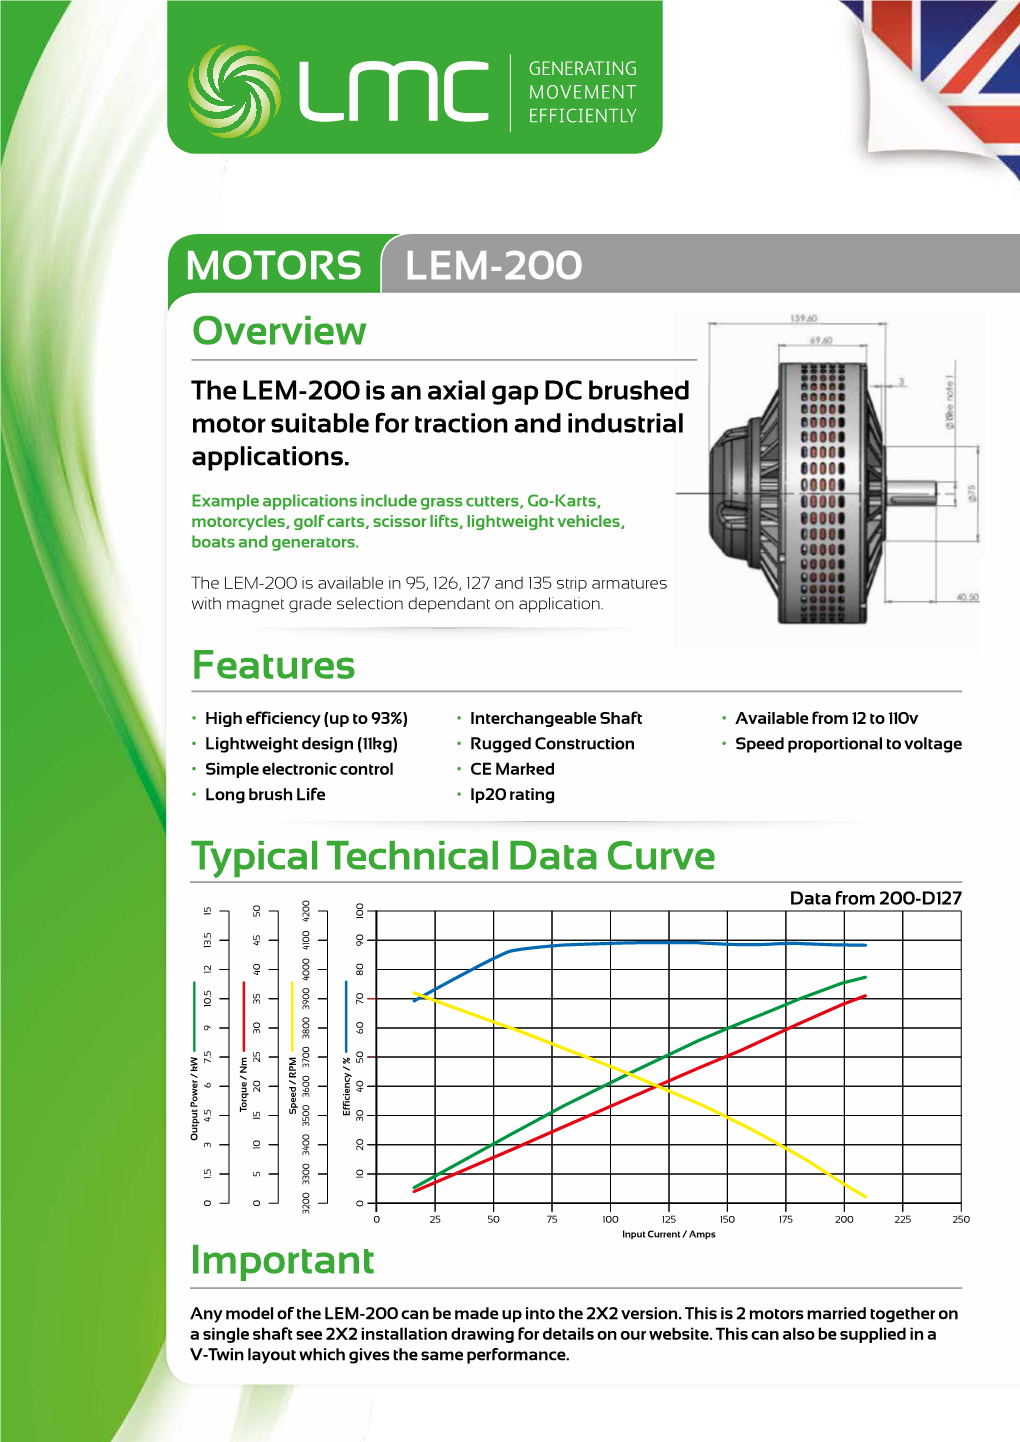 LEM-200 GENERATING MOVEMENT EFFICIENTLY Overview the LEM-200 Is an Axial Gap DC Brushed Motor Suitable for Traction and Industrial Applications